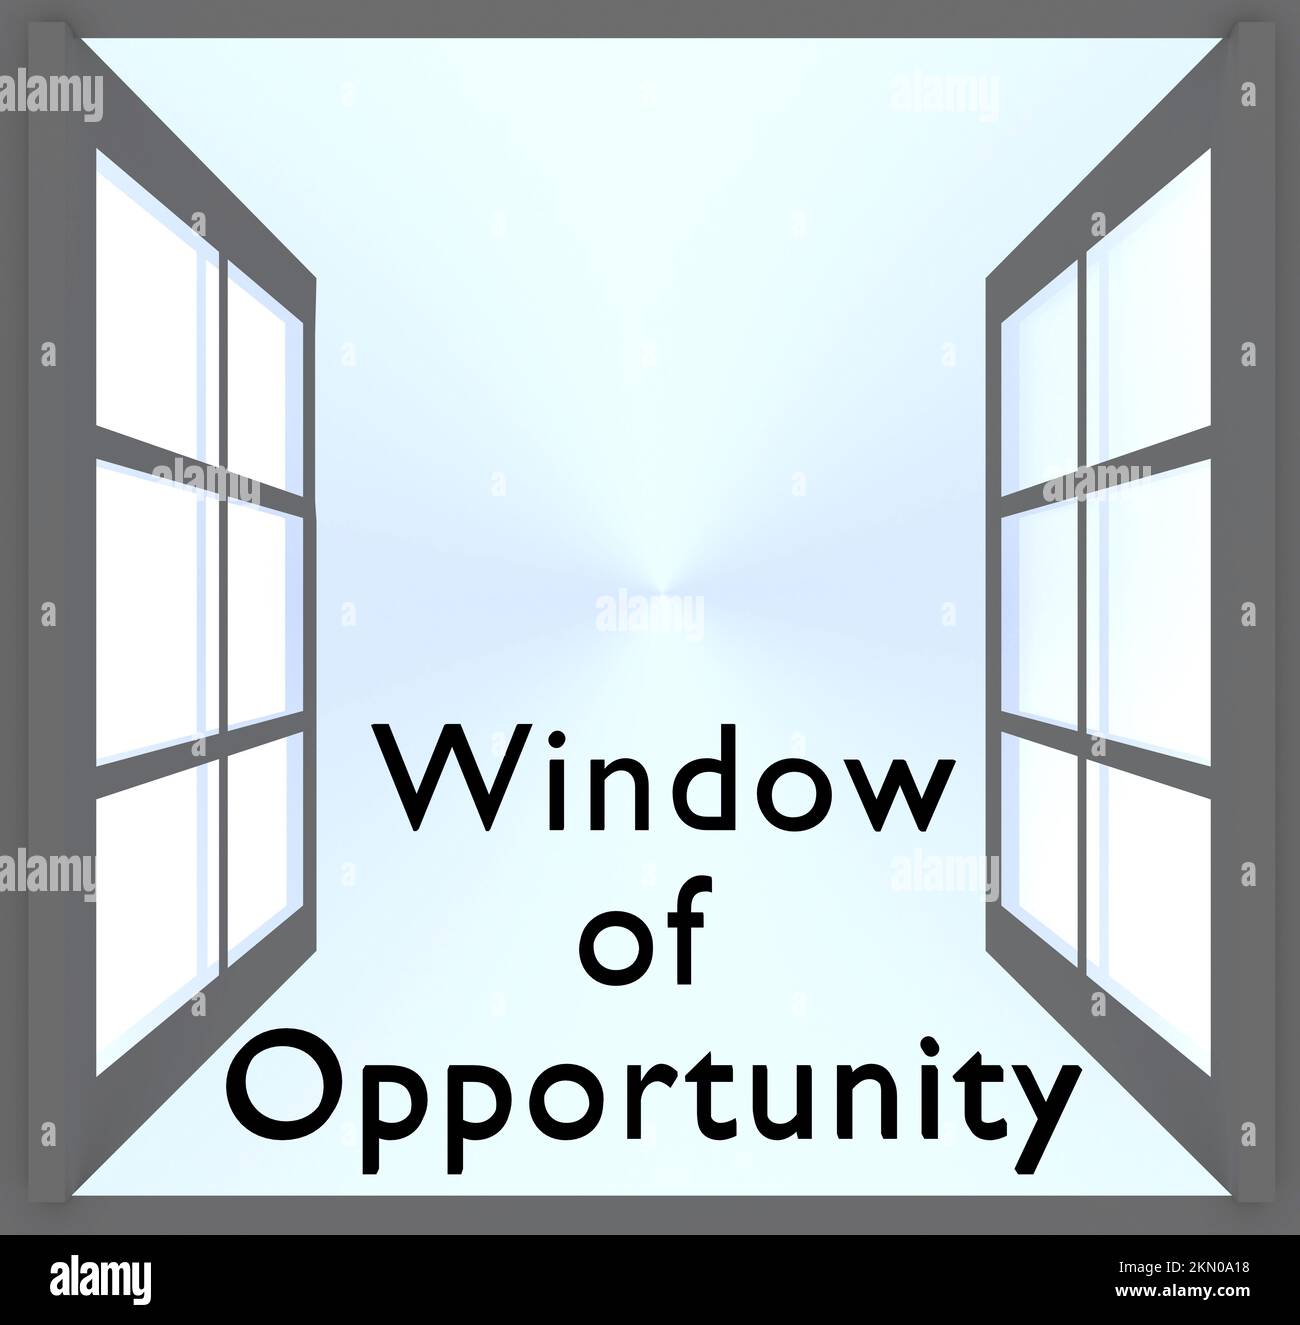 3D illustration of an open window with the script Window of Opportunity Stock Photo